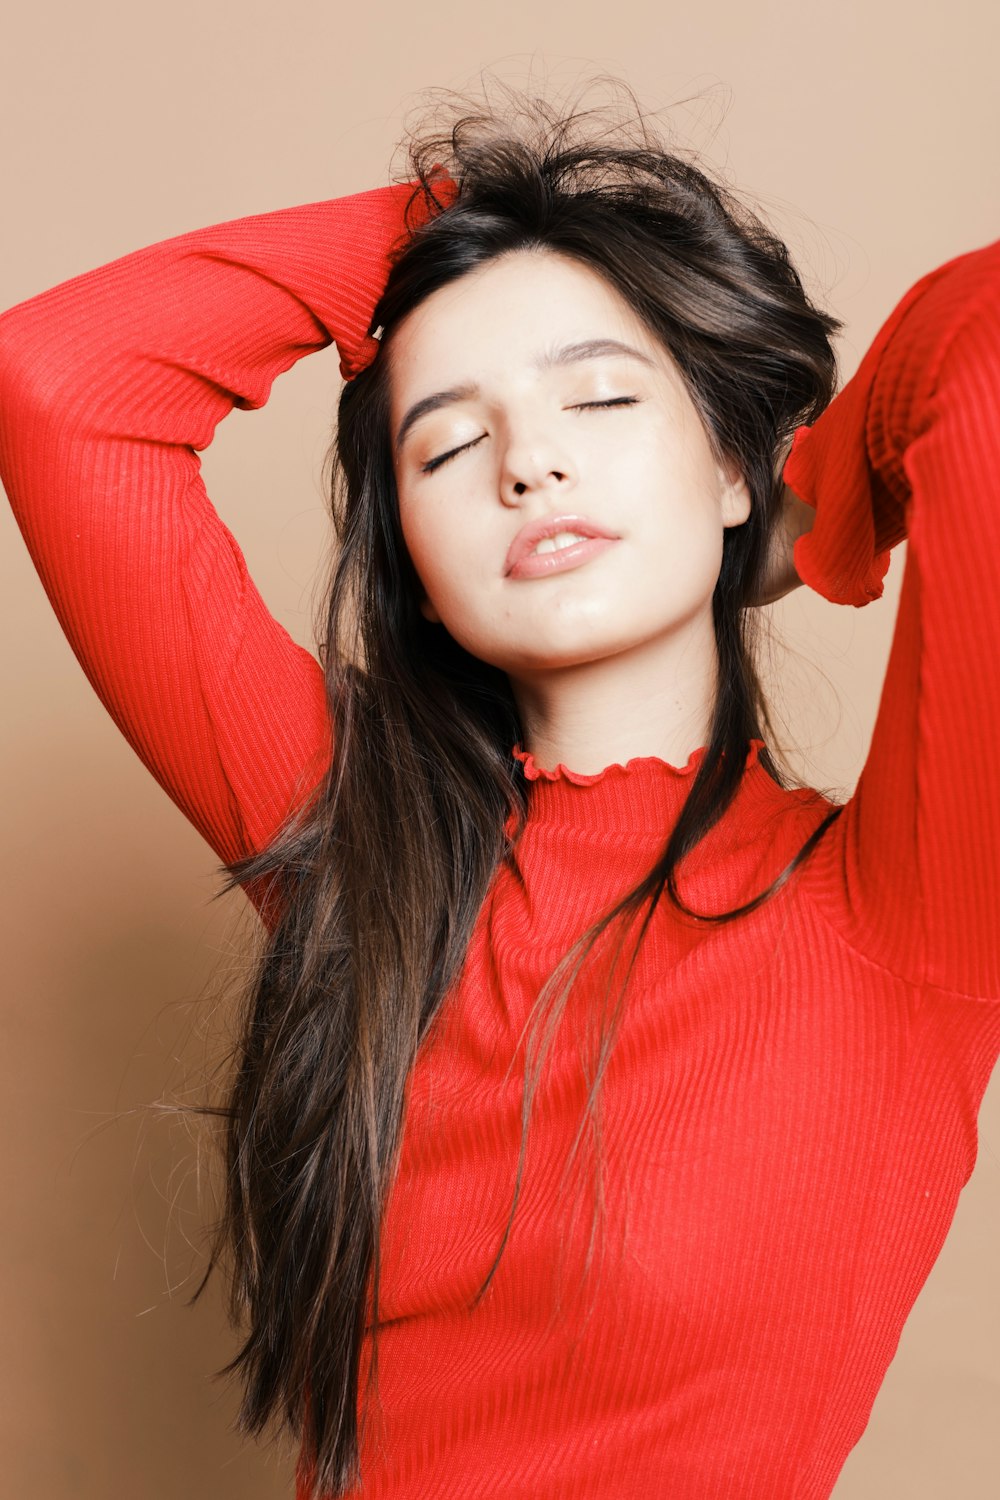 woman in red turtleneck sweater holding her hair and closing eyes